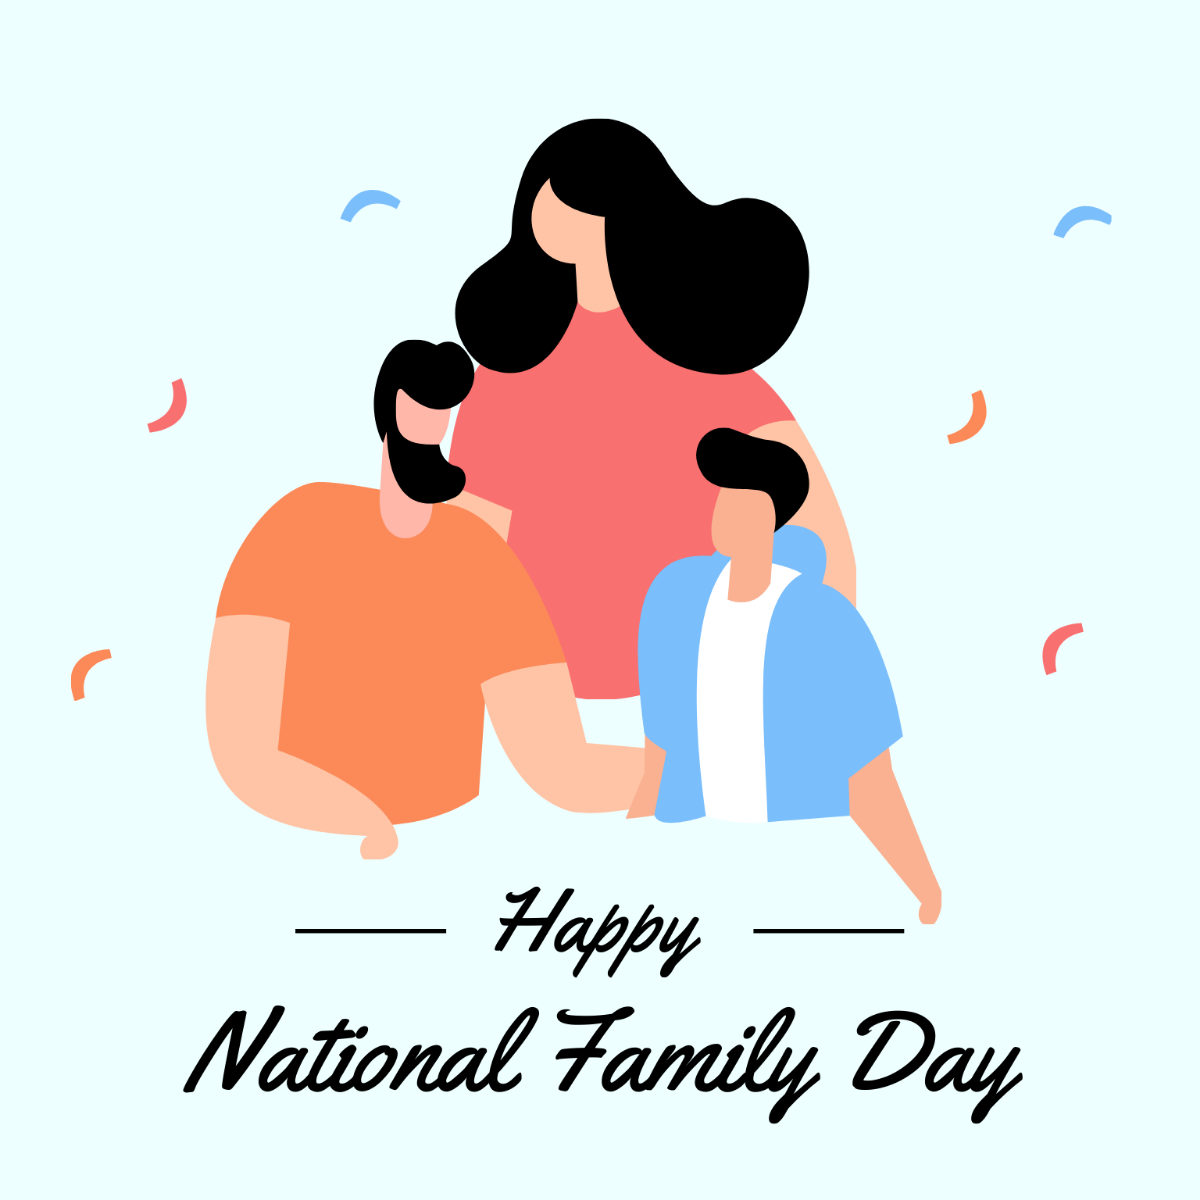 Happy National Family Day Vector